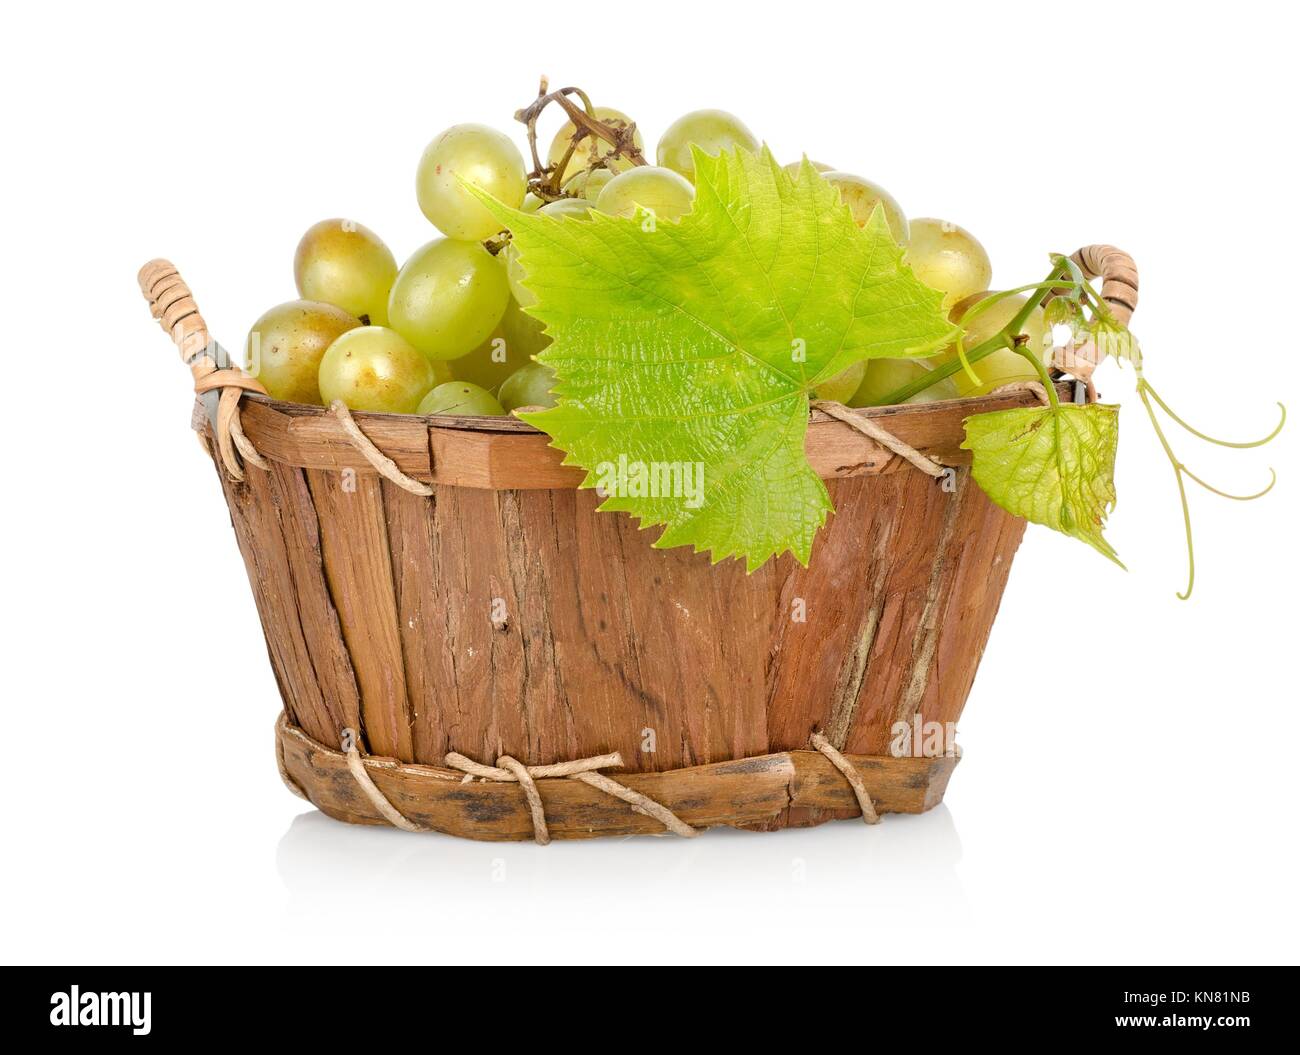 Grapes in a wooden basket isolated on white background. Stock Photo